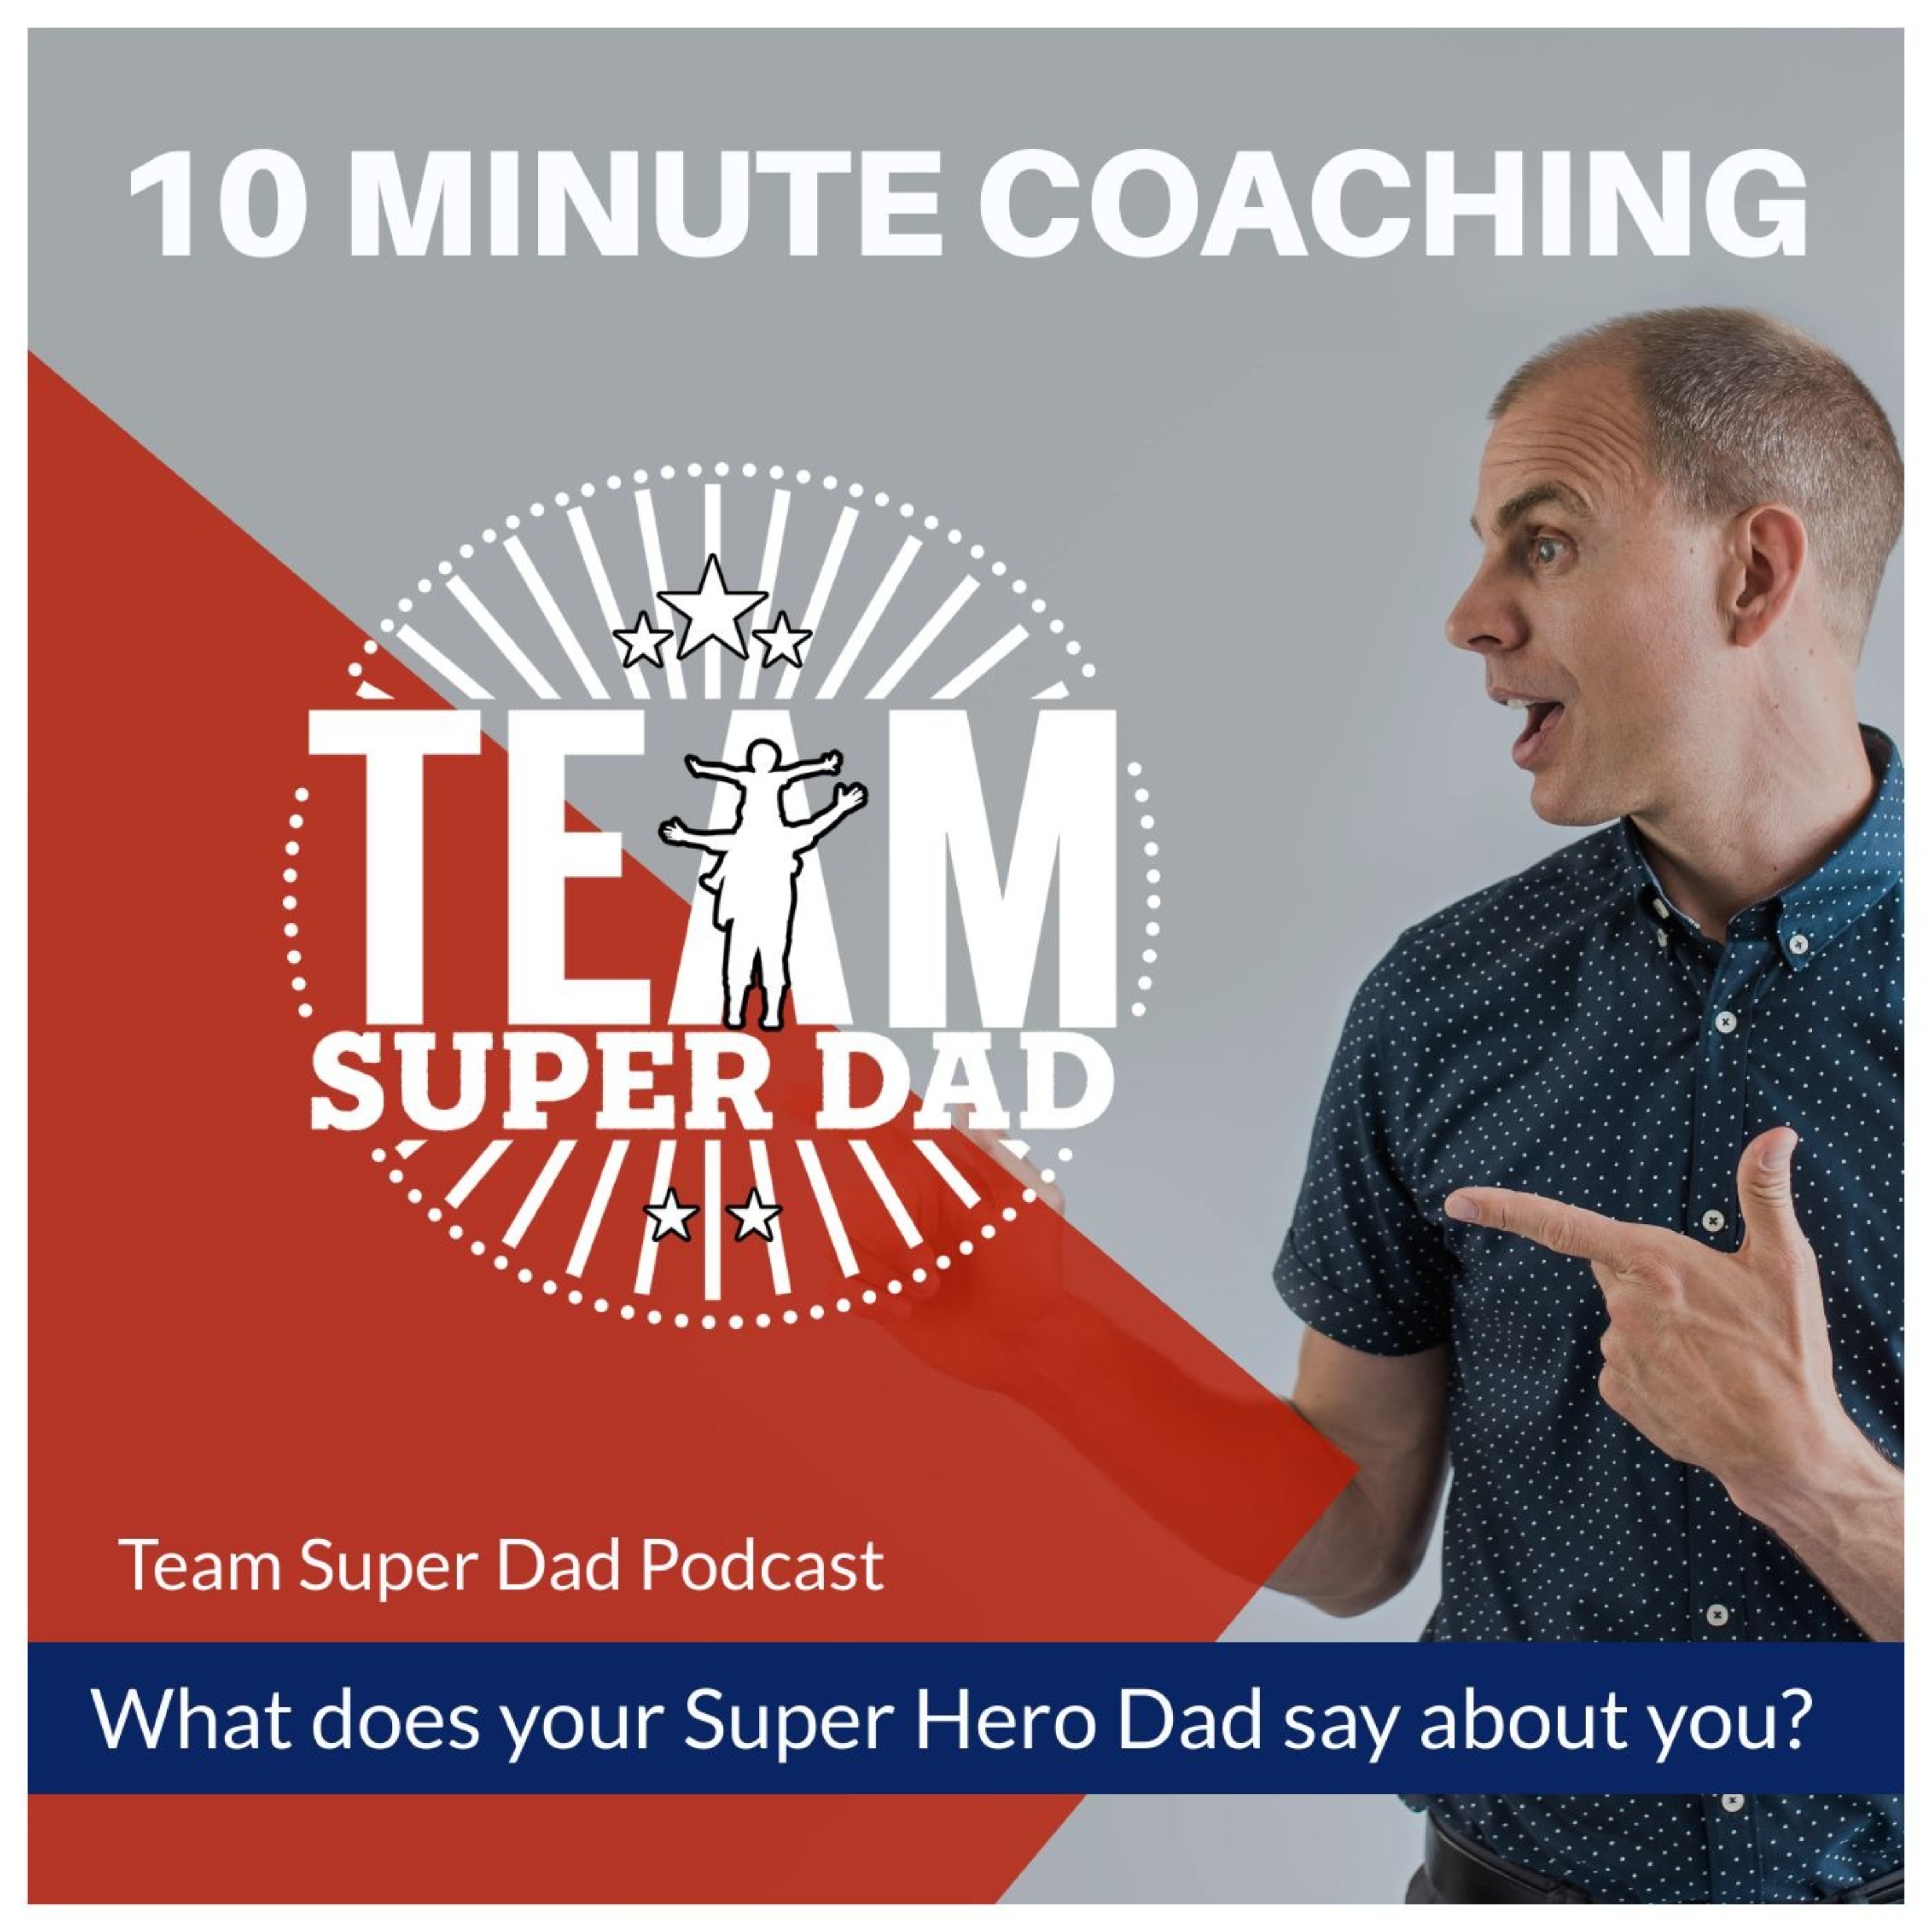 What Would Your Super Hero Dad Say About You?